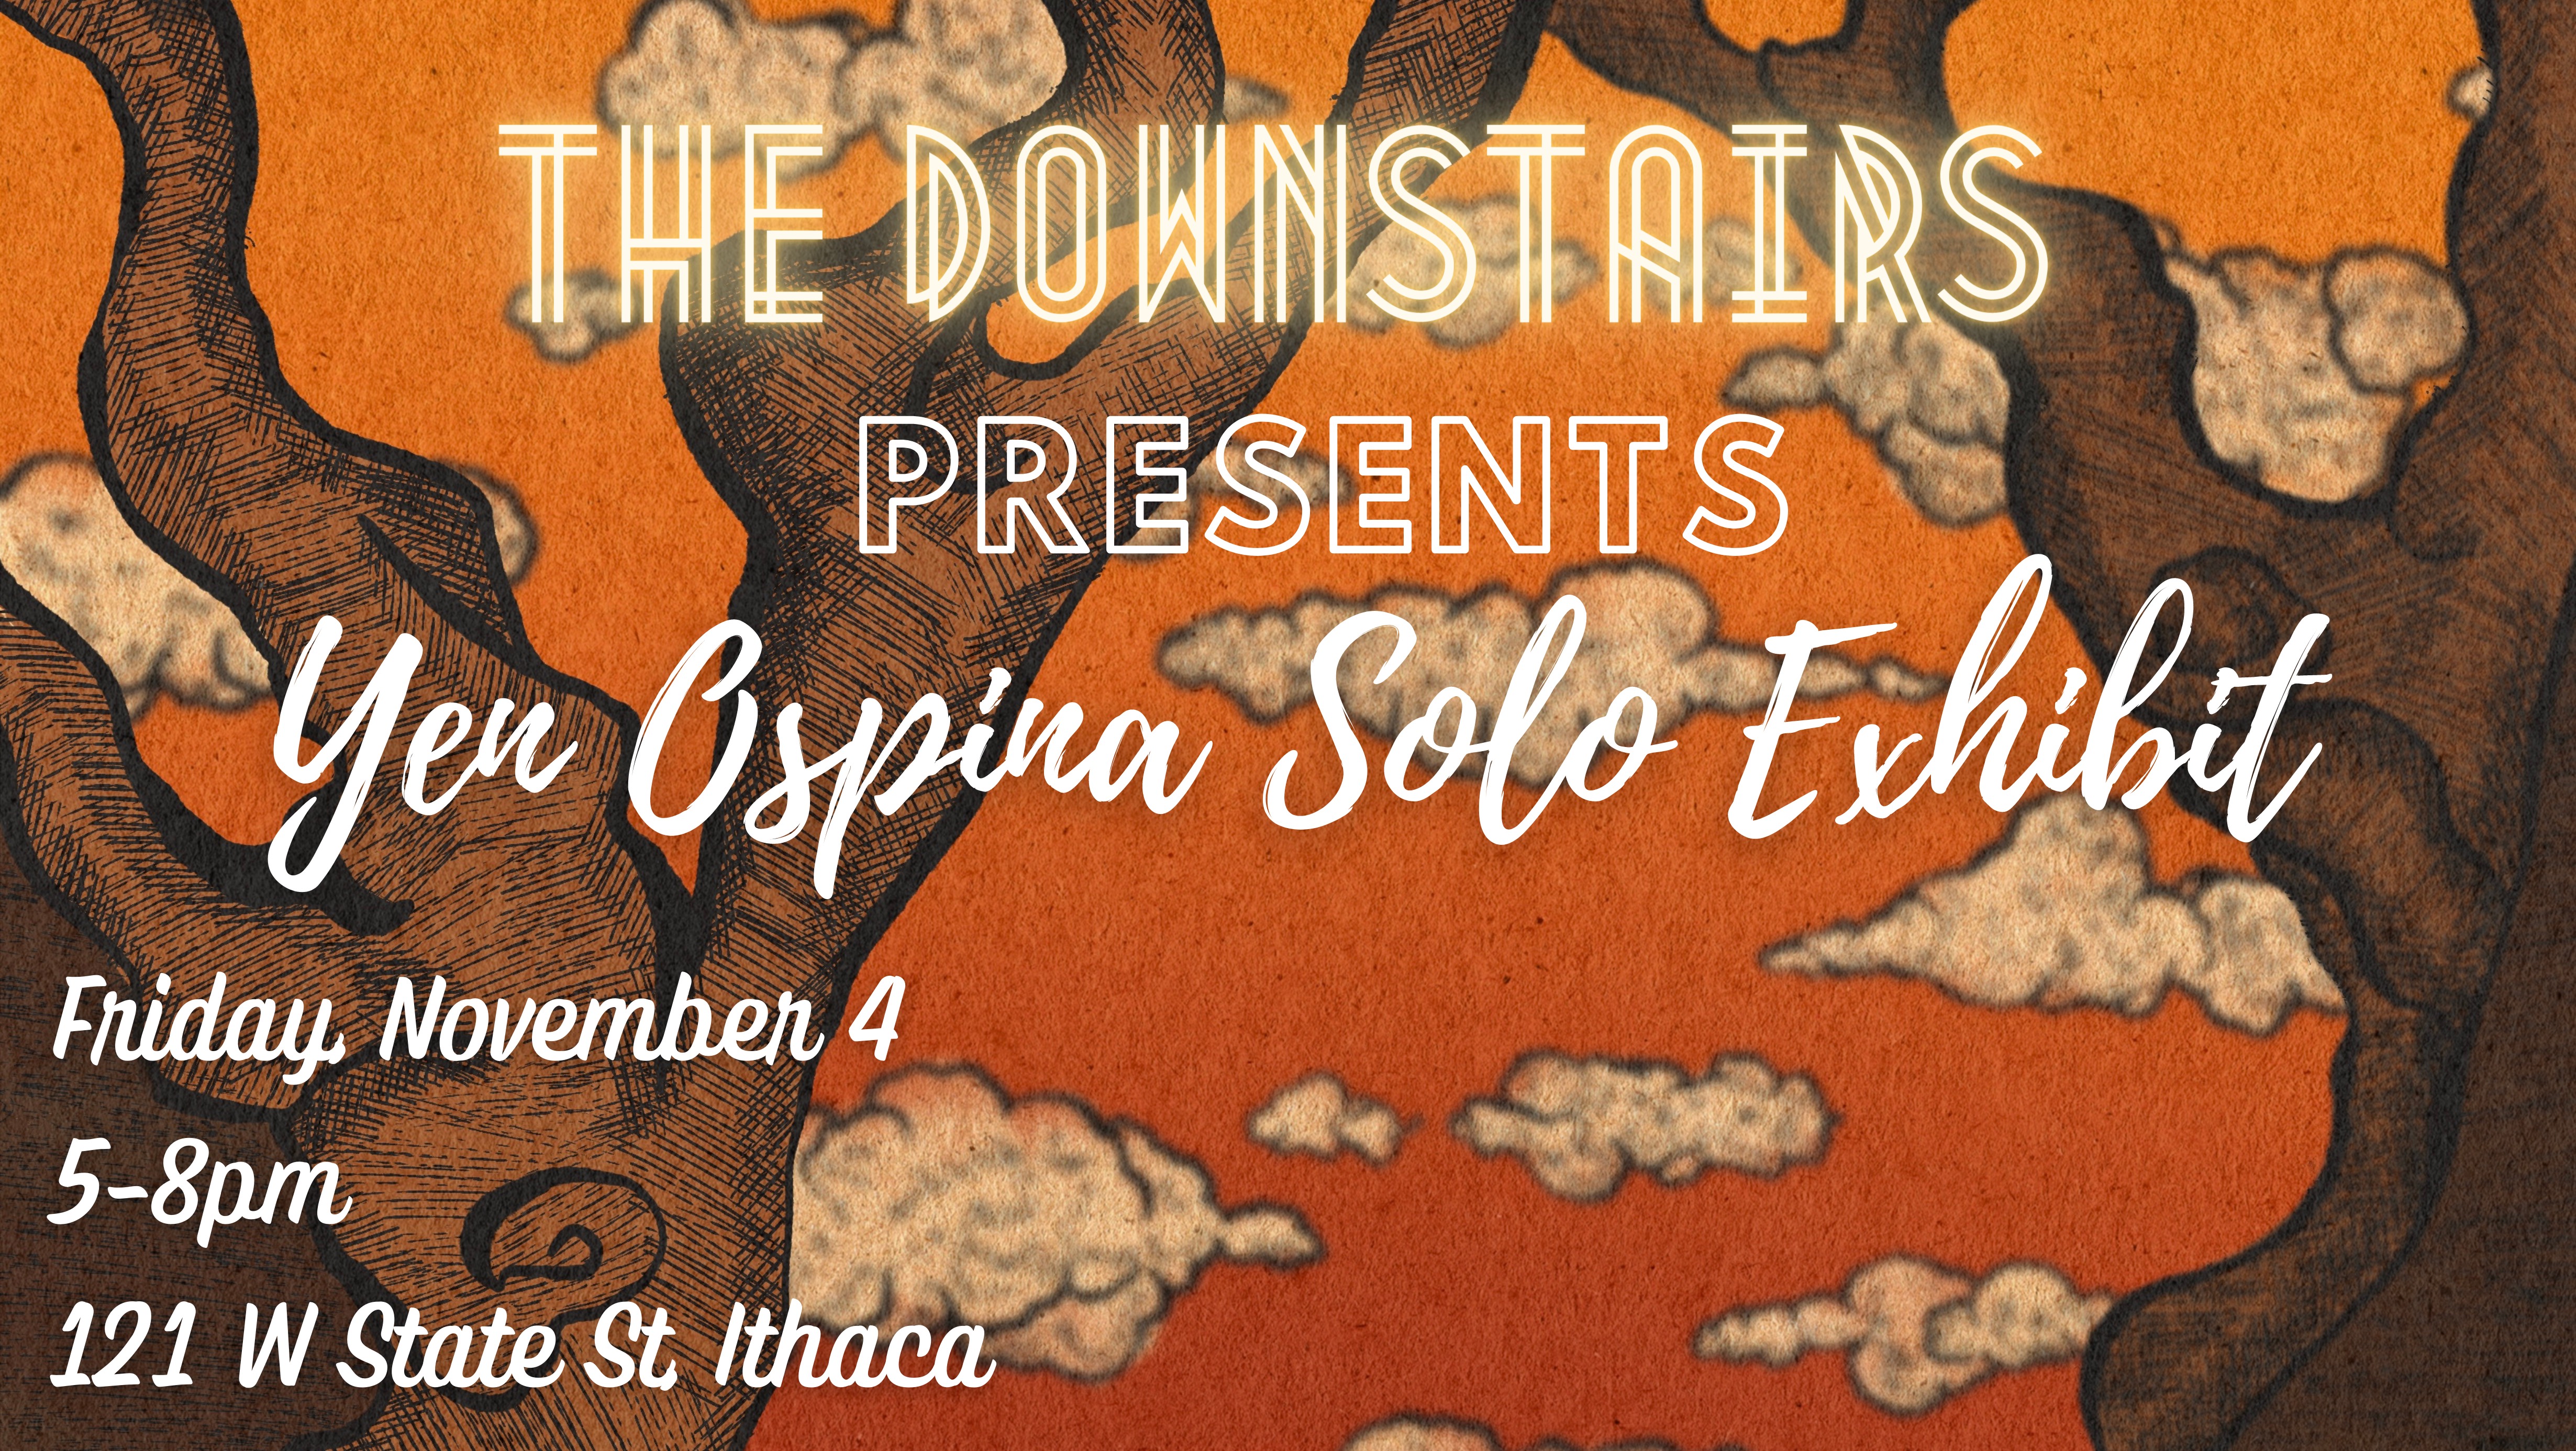 Yen Ospina Downstairs Solo Exhibit